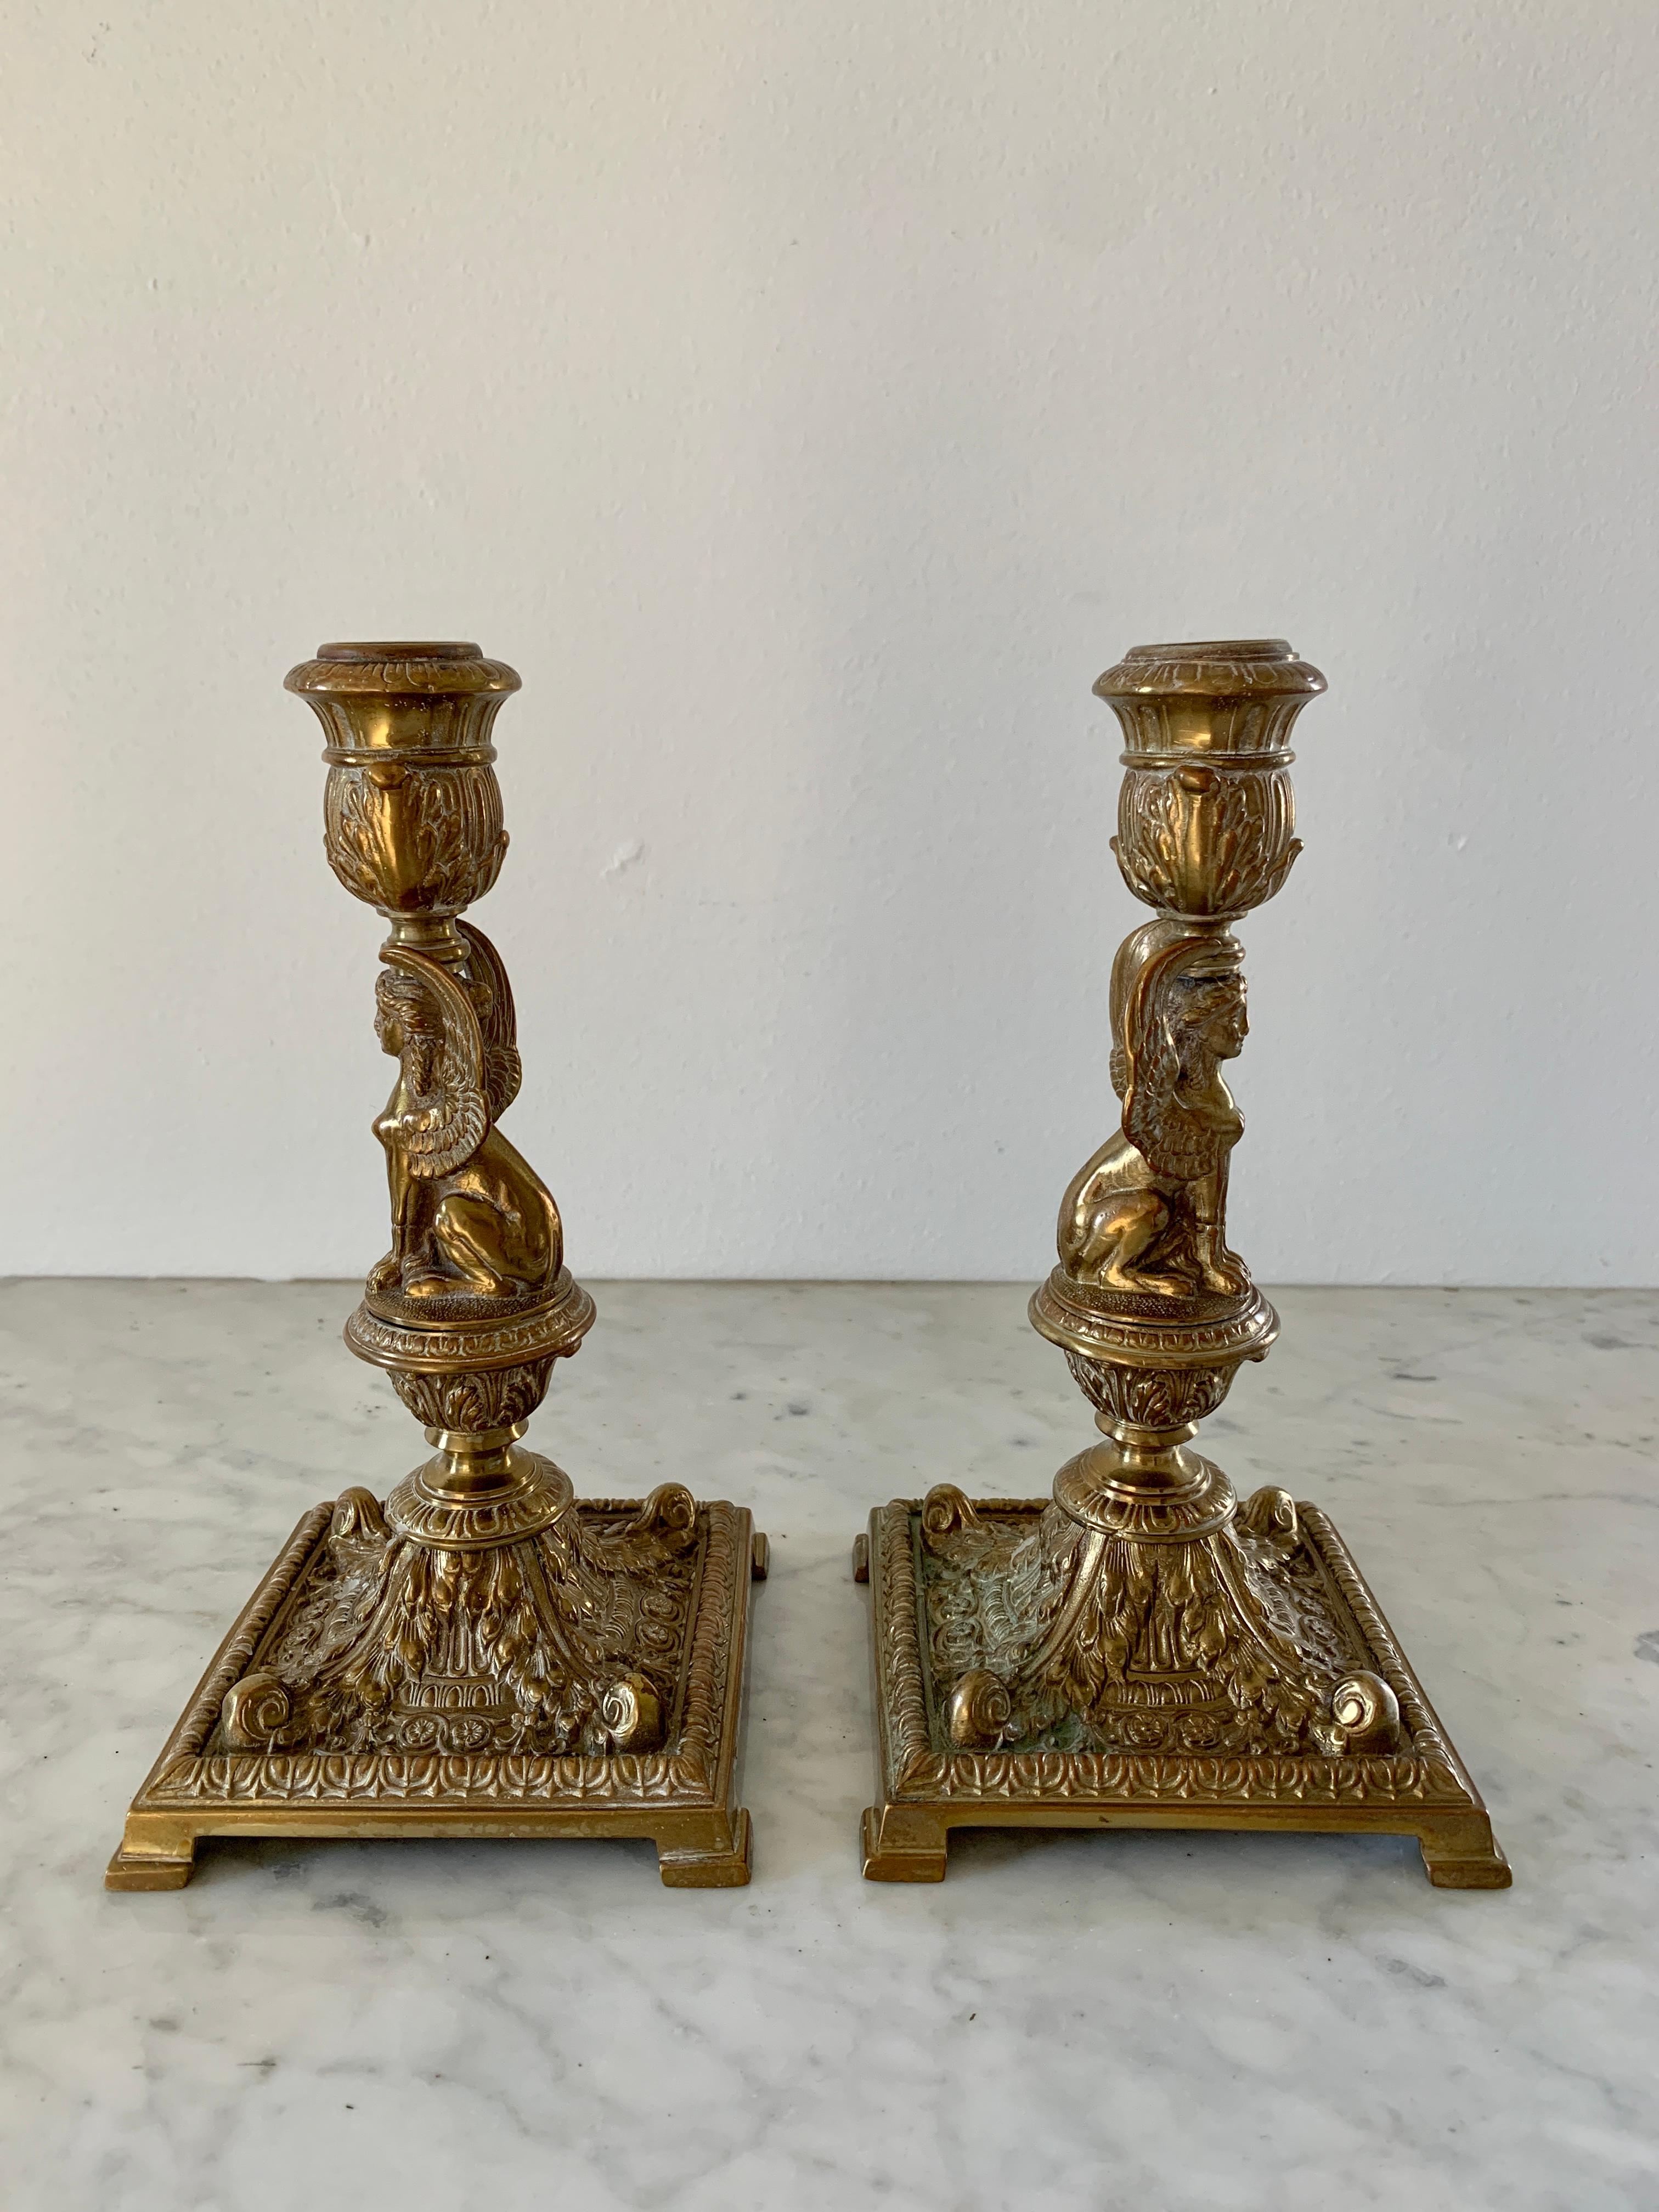 19th Century Egyptian Revival Gilt Bronze Sphinx Candlestick Holders, Pair For Sale 1